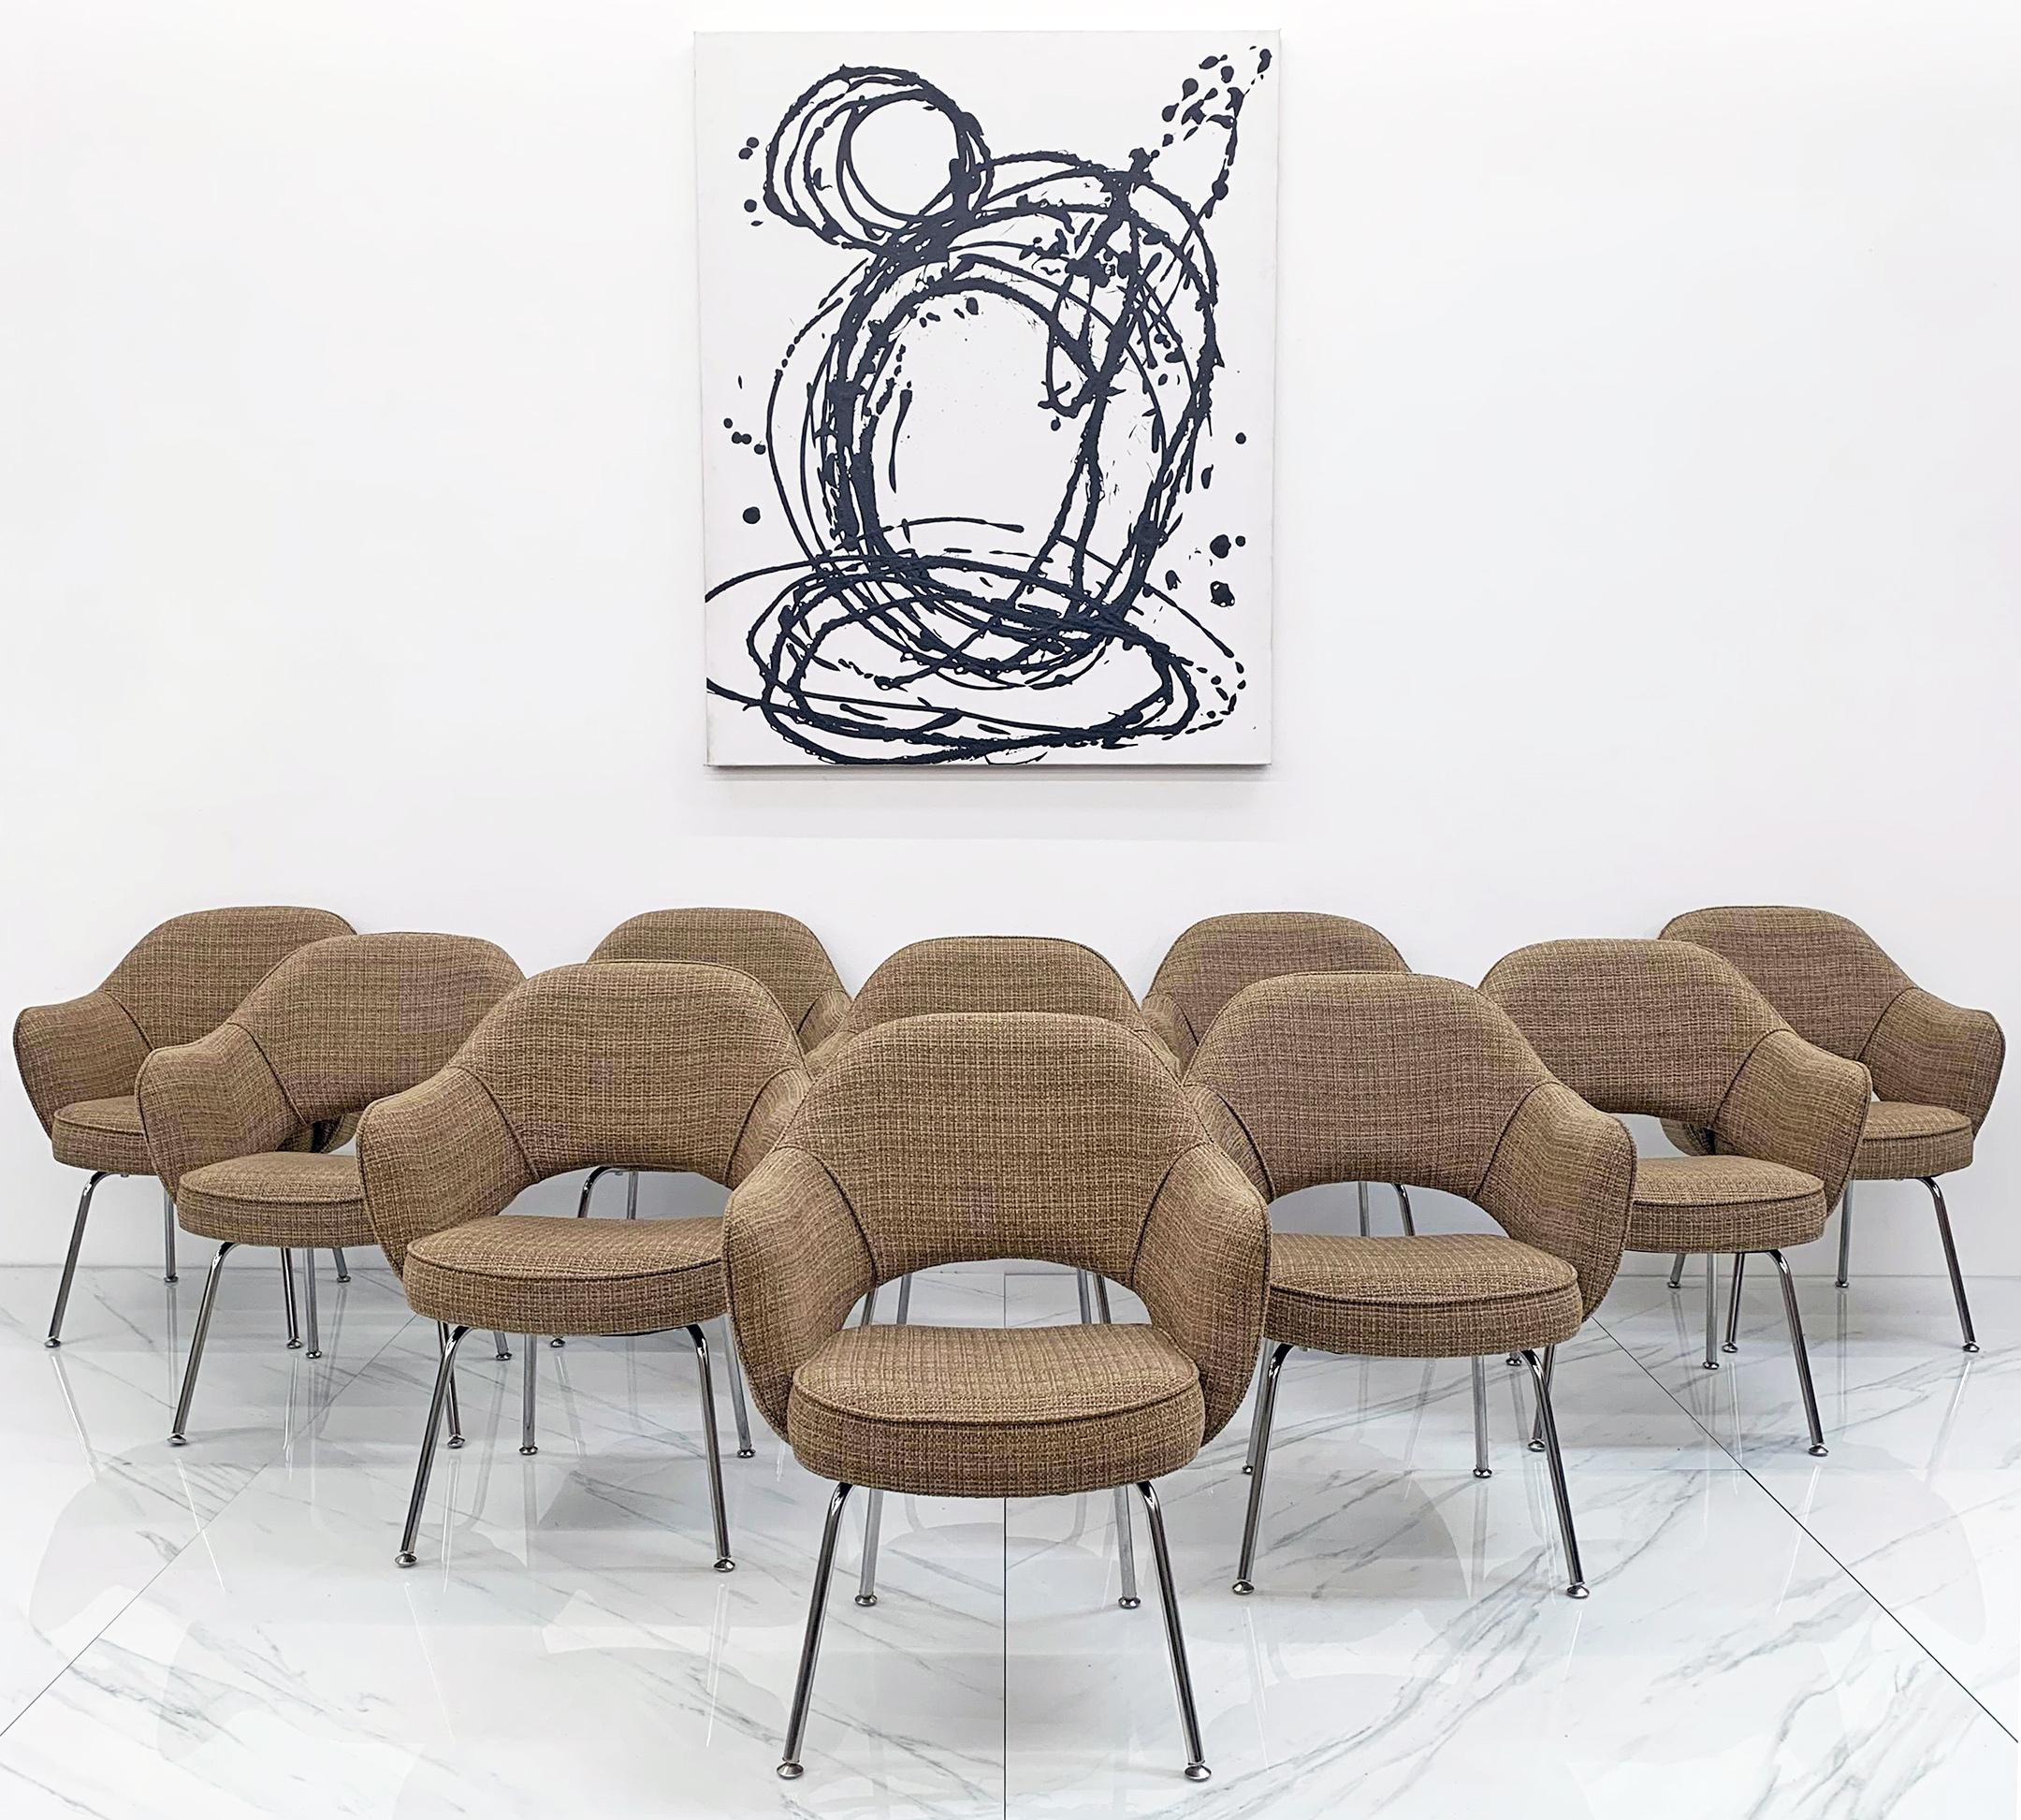 One of Knoll's most popular designs for the past 70 years, Eero Saarinen's executive armchair is about as timeless and chic as it gets. This current set of 10 we have available are upholstered in a custom tan tweed, with custom piping accentuating